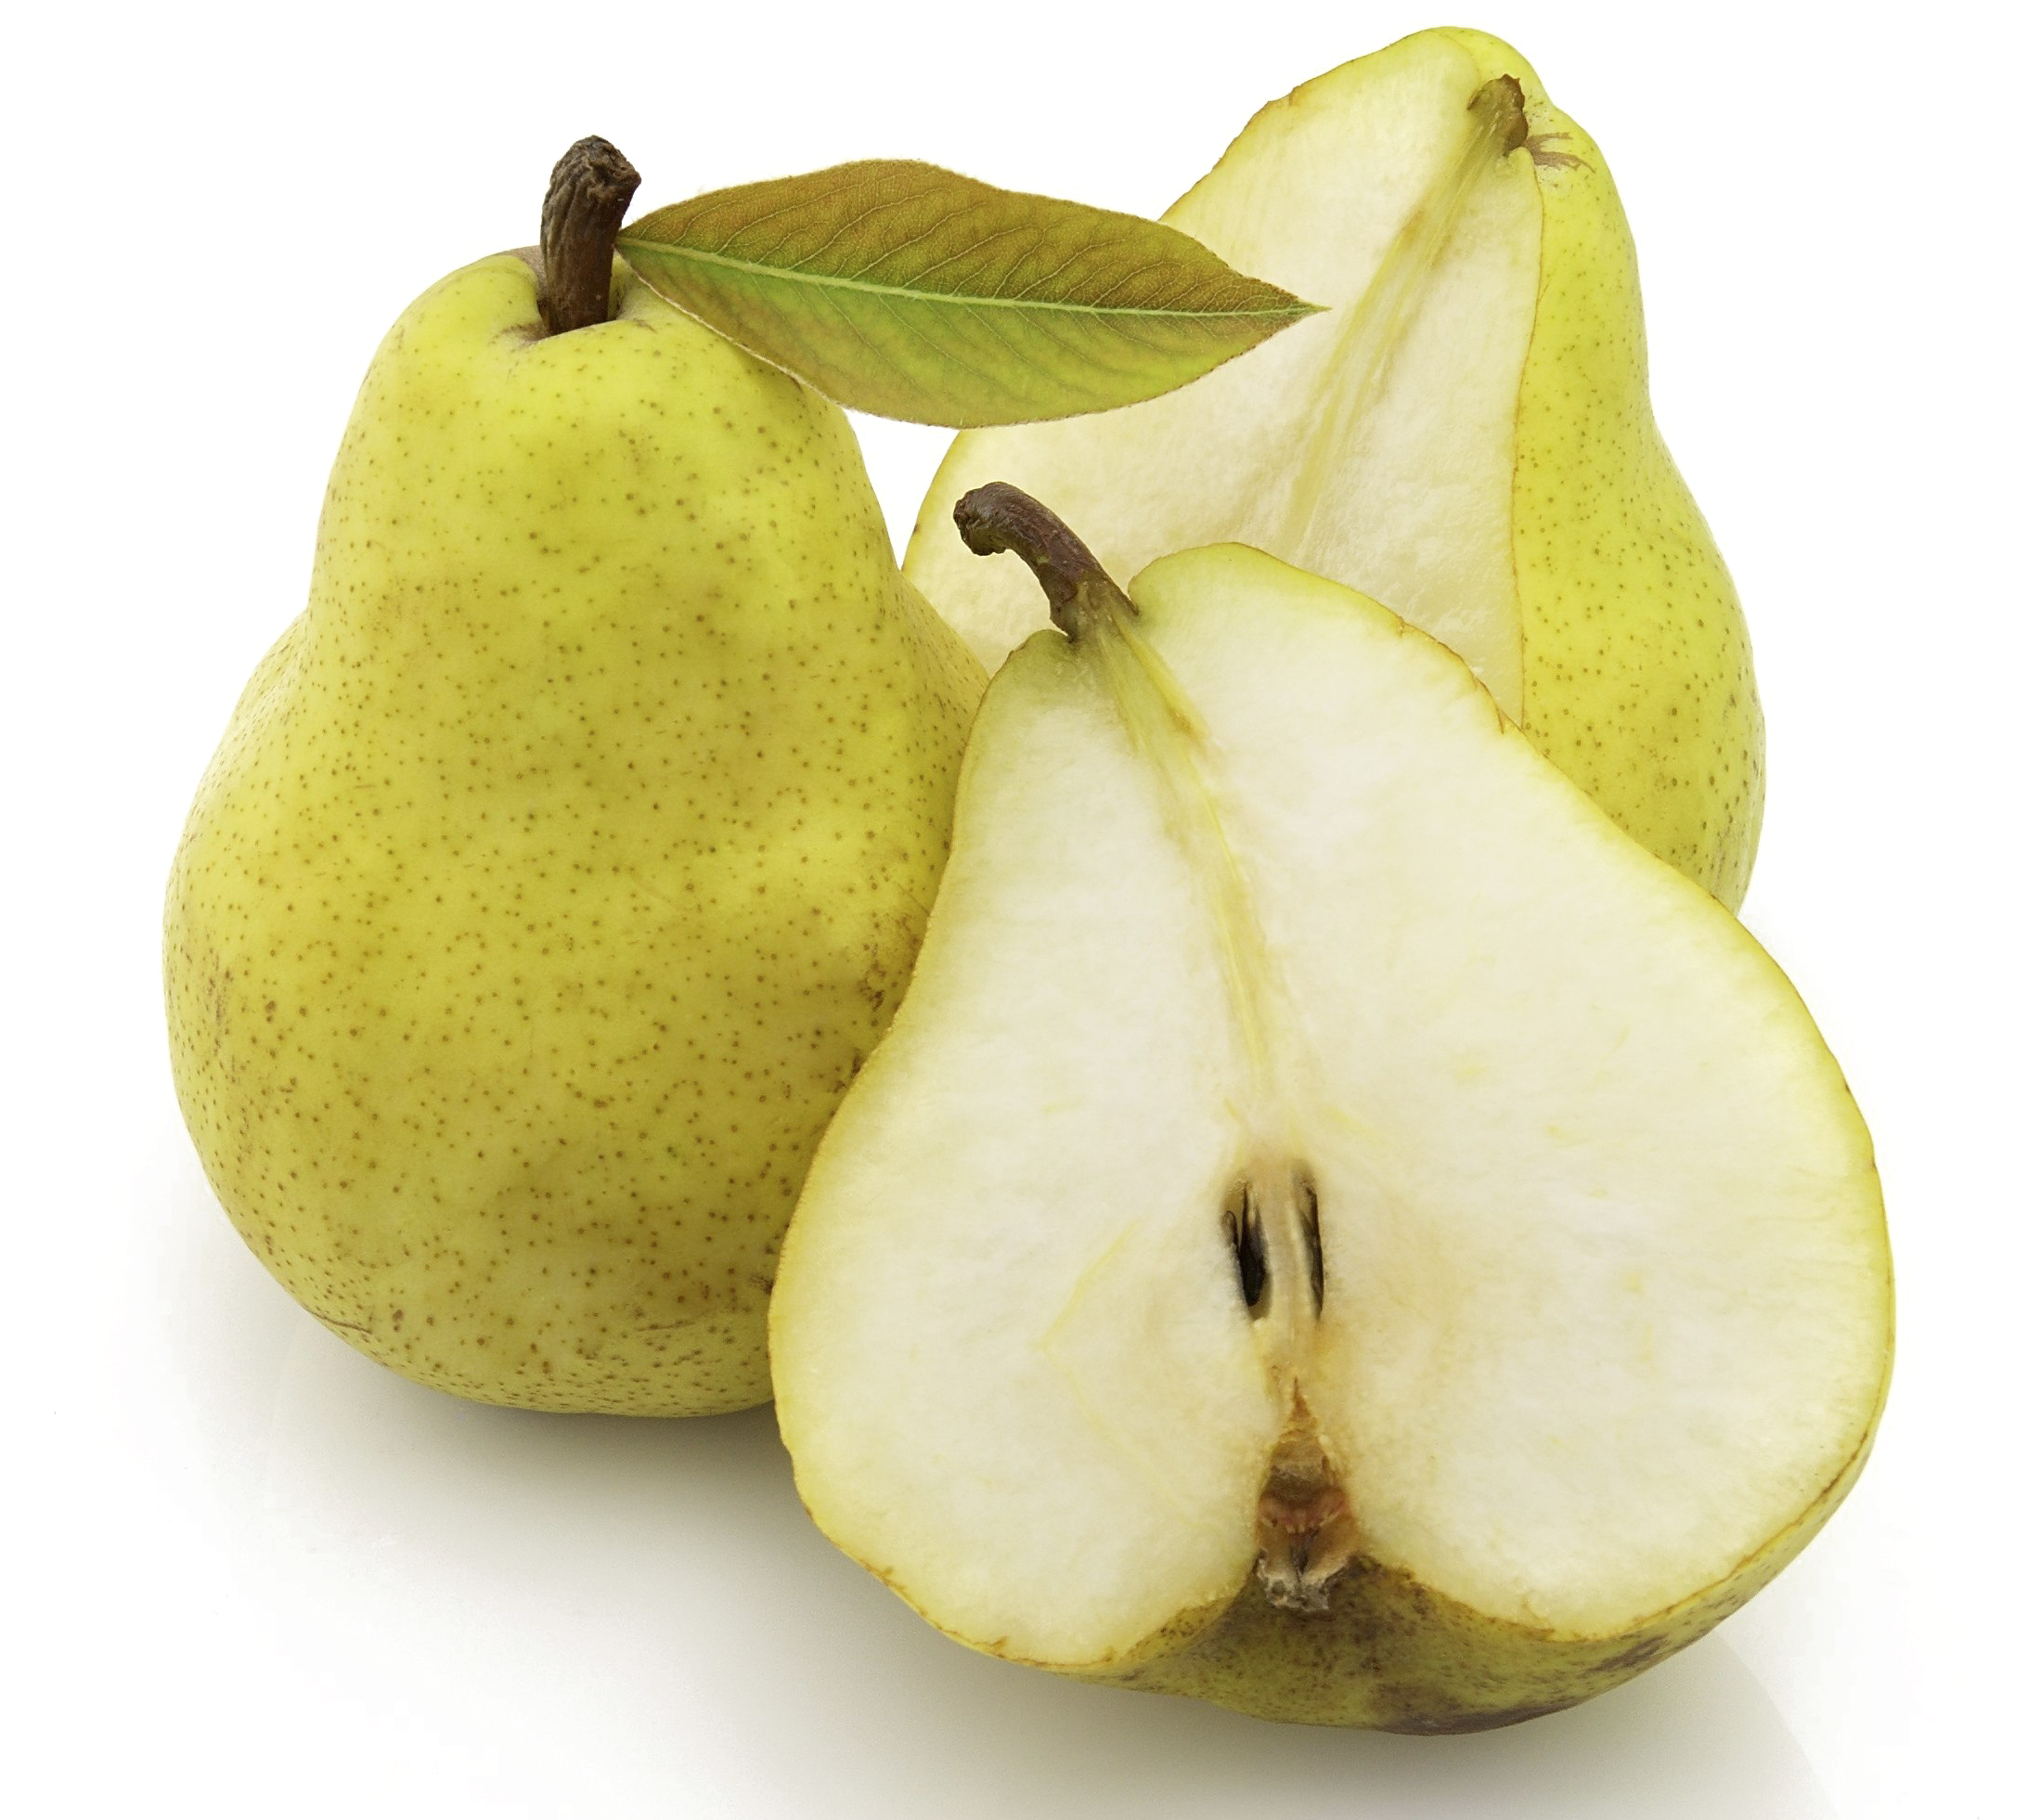 A Group Of Pears With A Leaf